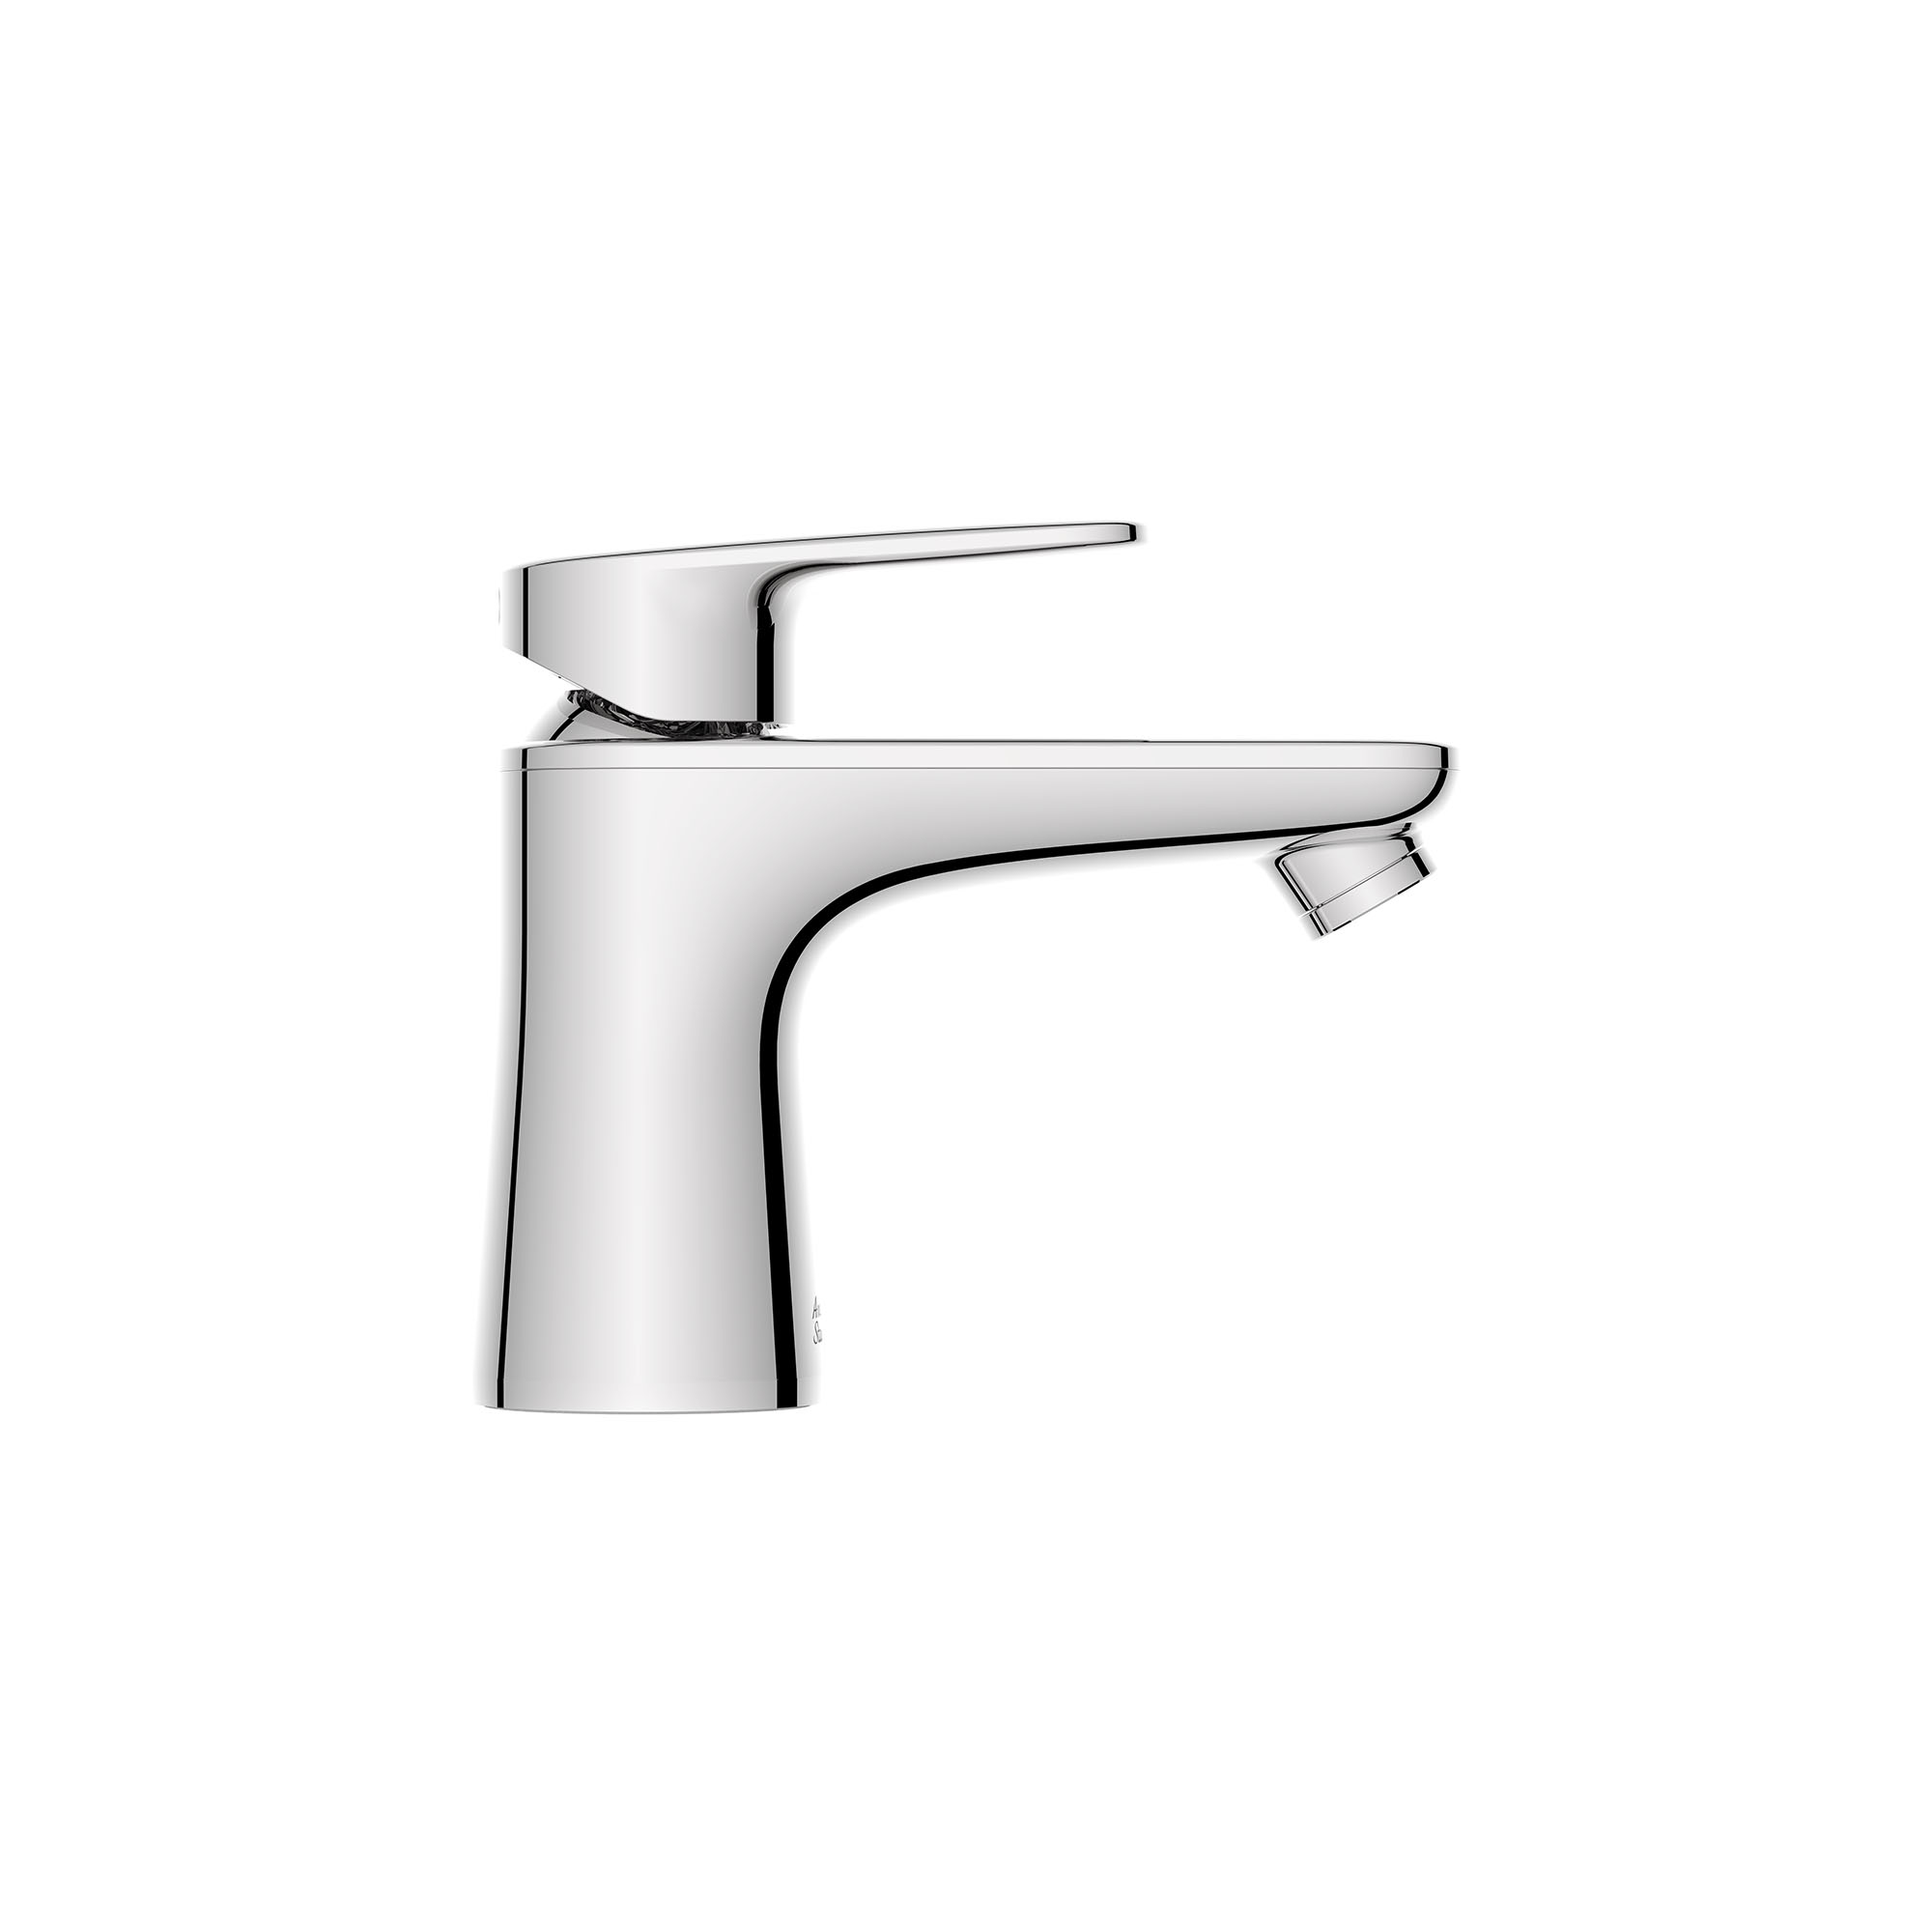 Aspirations™ Single-Handle Petite Bathroom Faucet 1.2 gpm/4.5 L/min With Lever Handle